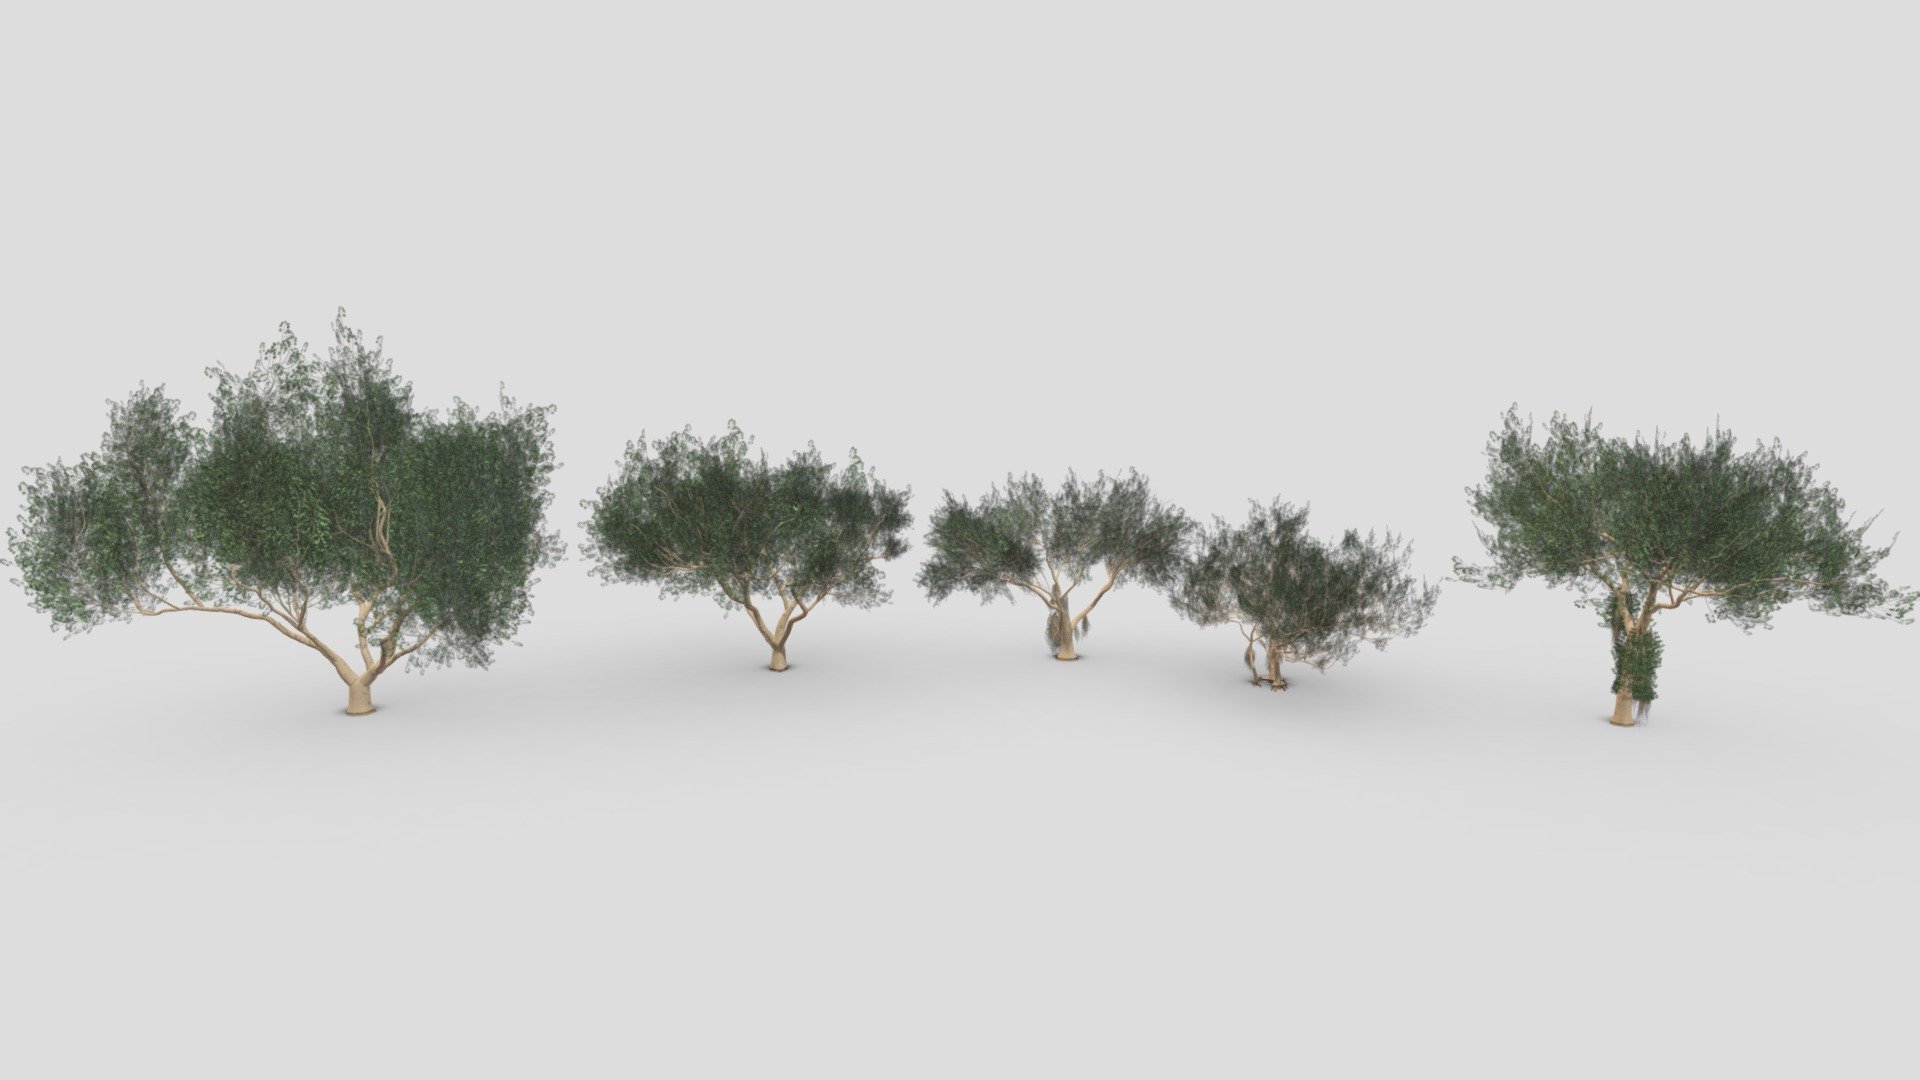 This file includes a collection of 5 3D Models of the Ficus Benjamina Tree. 

Note; This is the Second collection of Ficus Benjamina Tree.

Ficus Benjamina Tree-S06: https://sketchfab.com/3d-models/ficus-benjamina-tree-s06-76db689b9cfc444590614665028eb94a

Ficus Benjamina Tree-S07: https://sketchfab.com/3d-models/ficus-benjamina-tree-s07-1c1f0b05d93942e4b1e108e7da8de681

Ficus Benjamina Tree-S08: https://sketchfab.com/3d-models/ficus-benjamina-tree-s08-55c2dc0237f140d5972d75d70317e631

Ficus Benjamina Tree-S09: https://sketchfab.com/3d-models/ficus-benjamina-tree-s09-08b26ea9f291405281212cc5e6bd2d47

Ficus Benjamina Tree-S10: https://sketchfab.com/3d-models/ficus-benjamina-tree-s10-60734a9531c440469b6afc65eab729c1 - Ficus Benjamina Tree-Pack 02 - Buy Royalty Free 3D model by ASMA3D 3d model